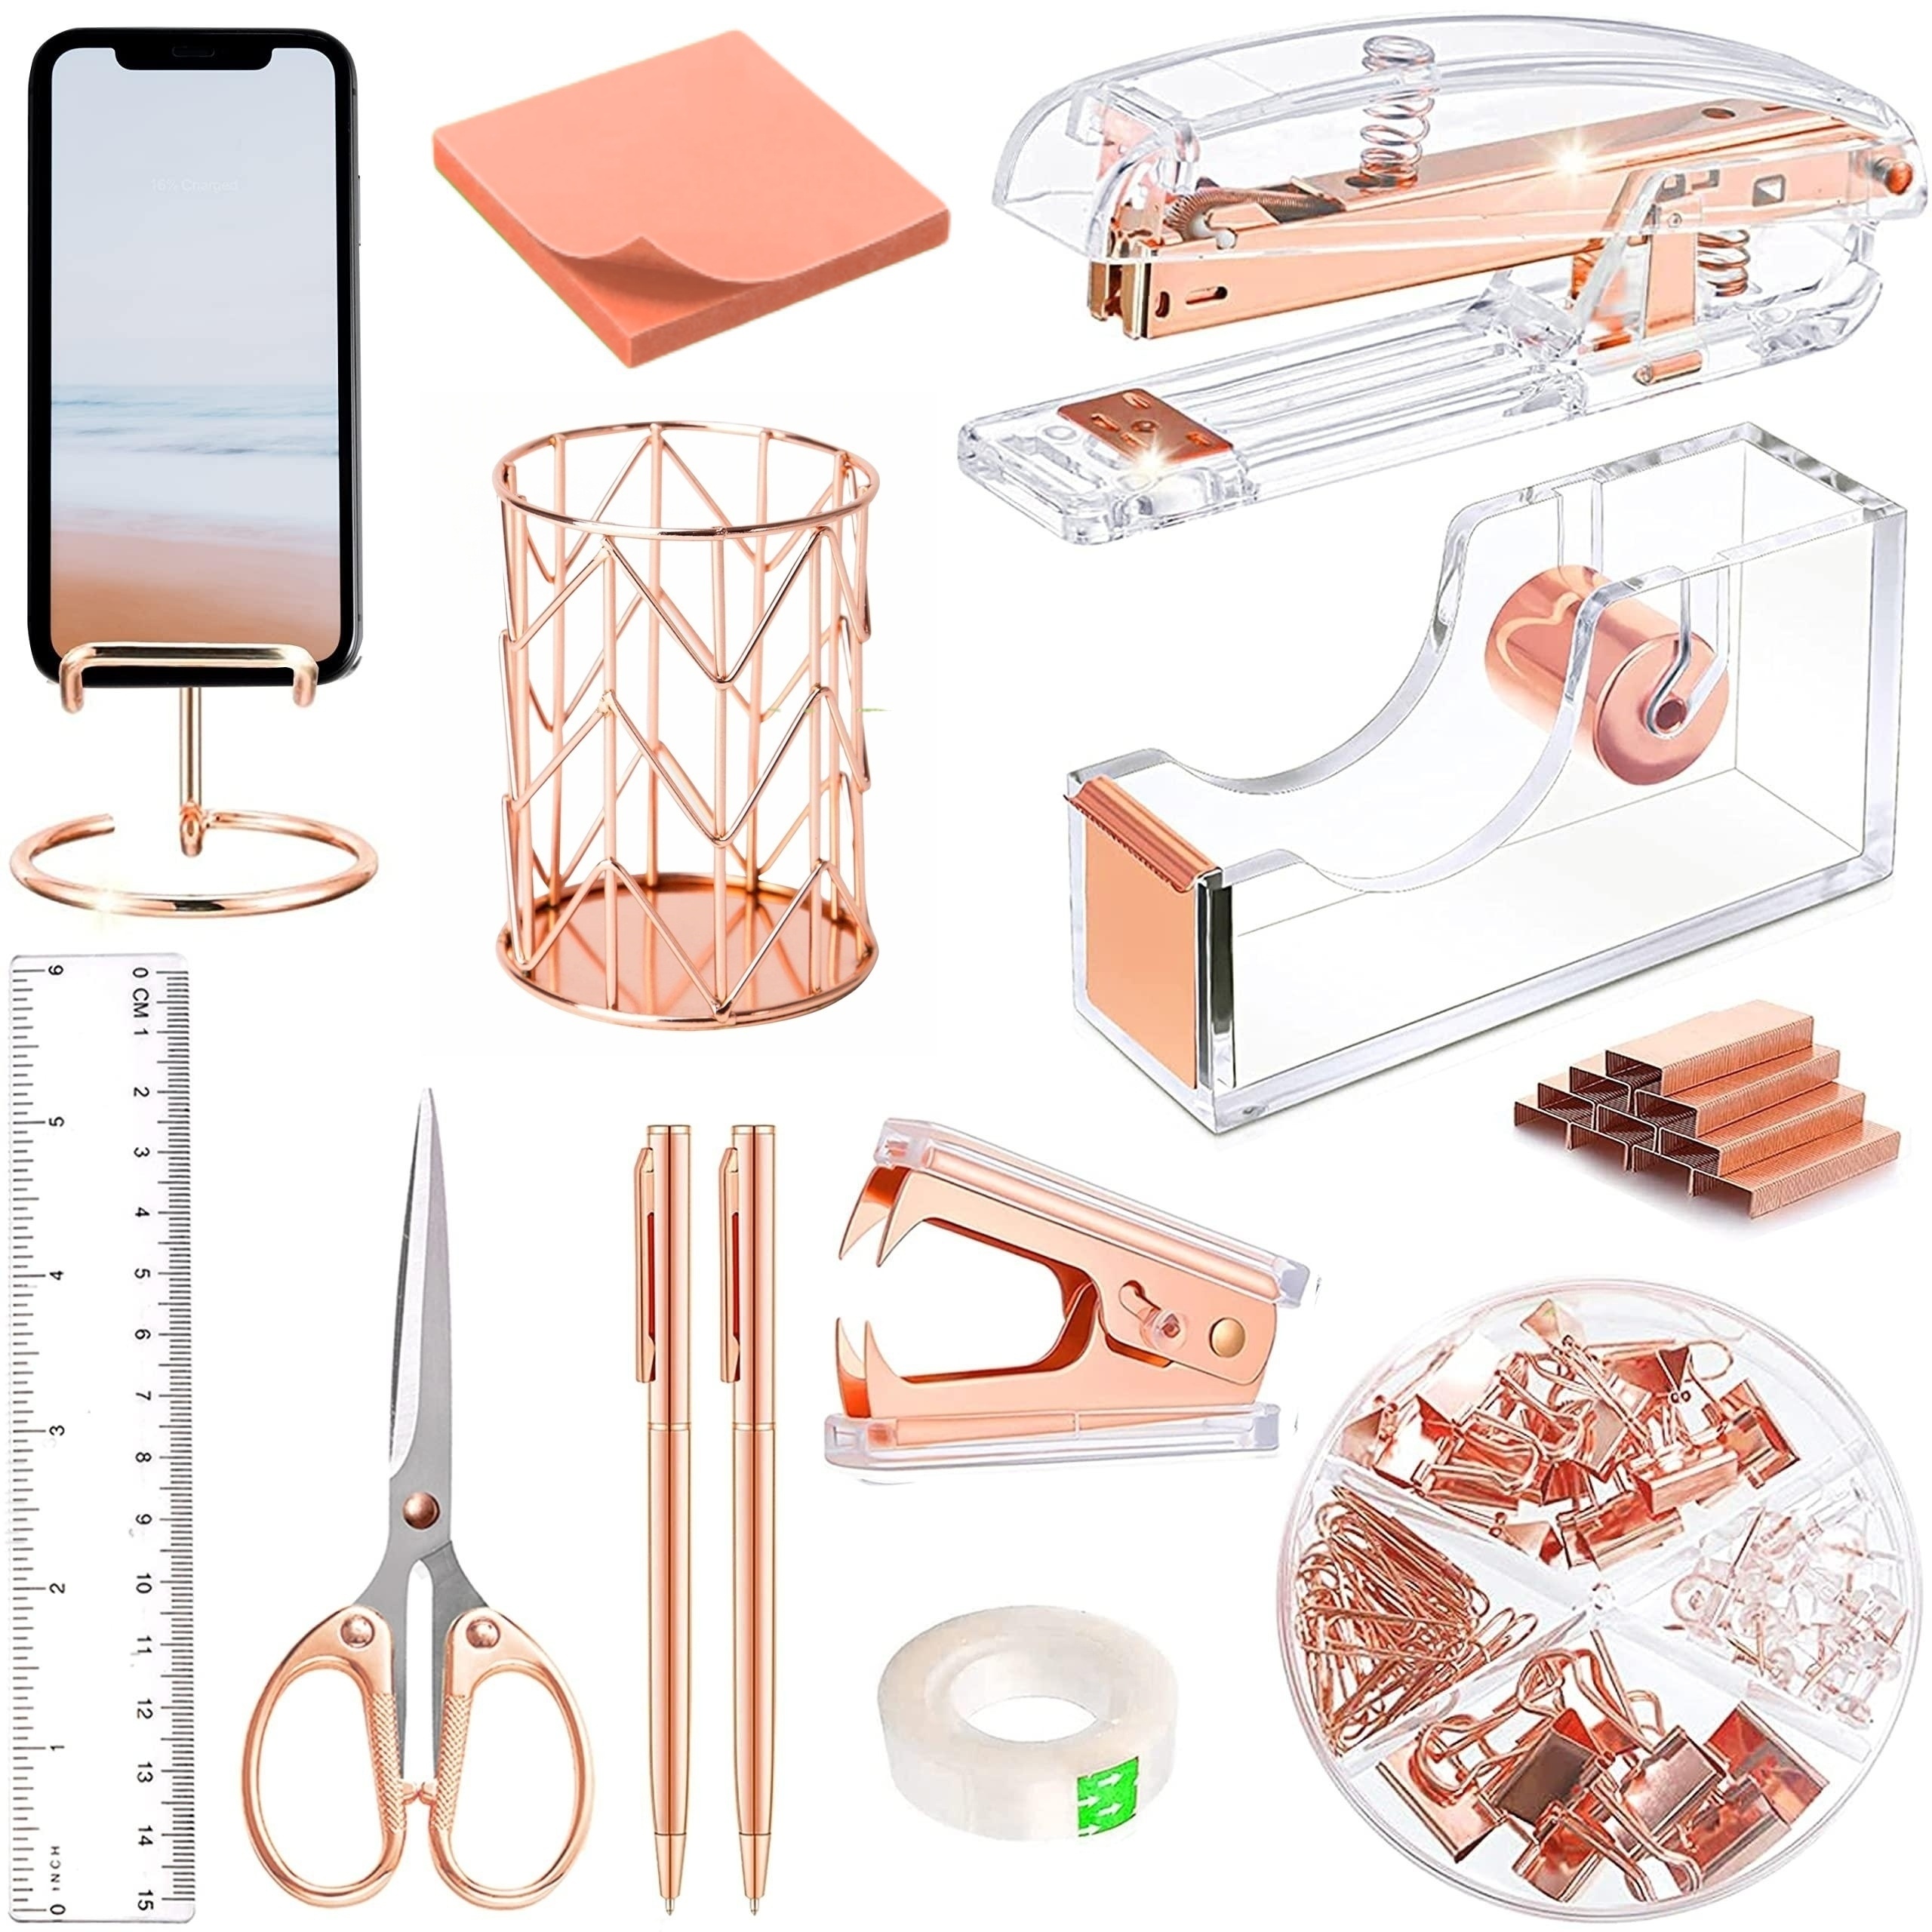 Gold Scissors and Stapler Set - Scissors and Stapler with 1000 Rose Gold  Staples, Luxury Set of Gold Office Supplies & Desk Accessories